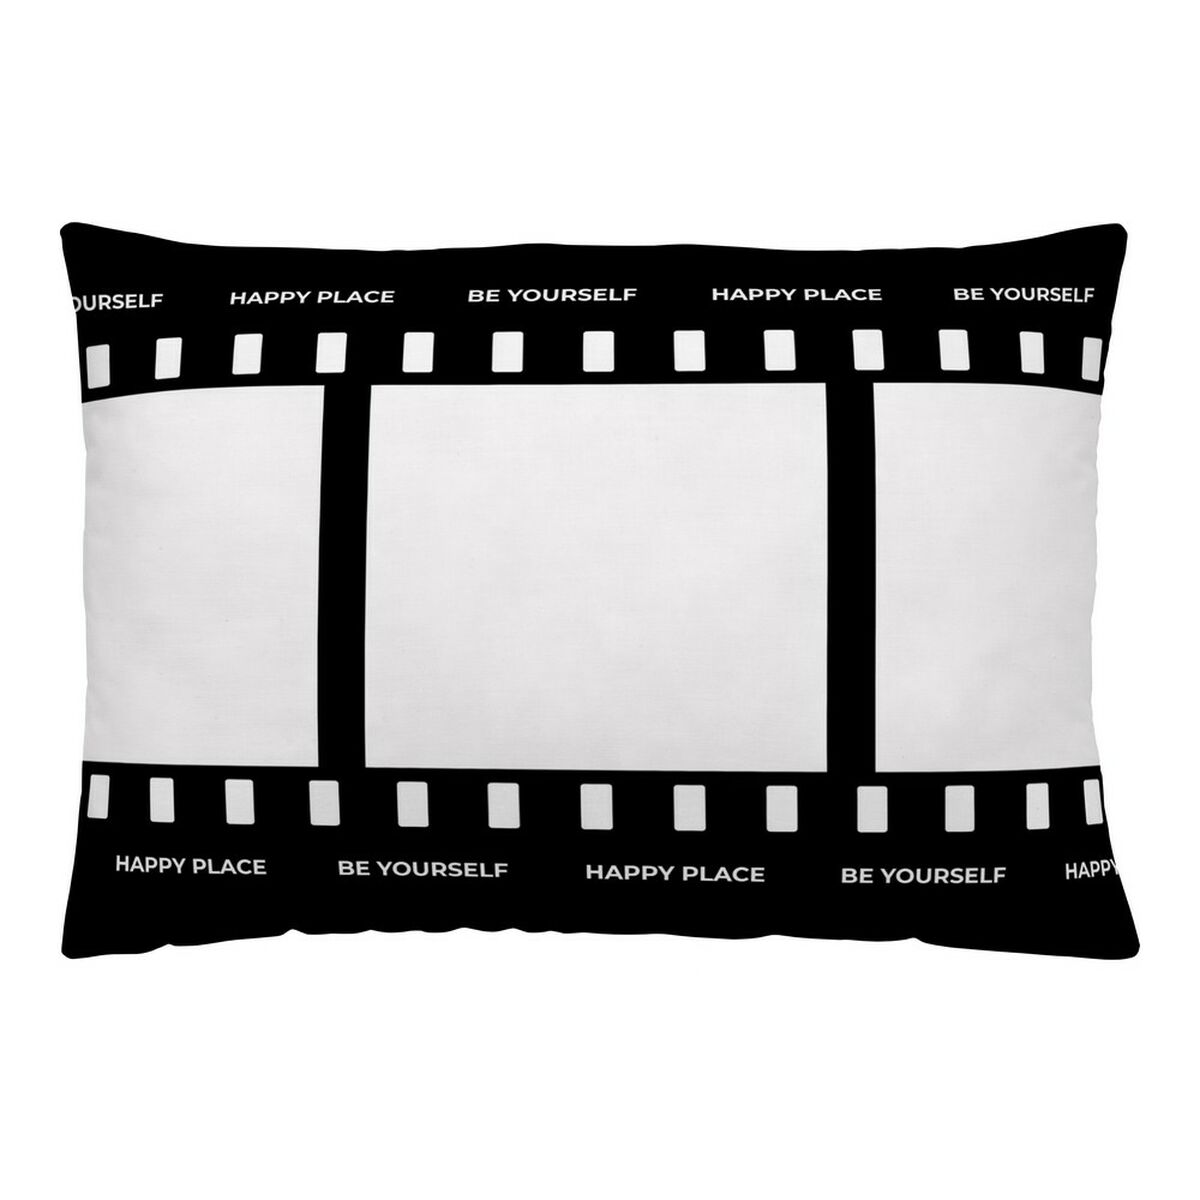 Cushion cover Naturals Belice (50 x 30 cm)